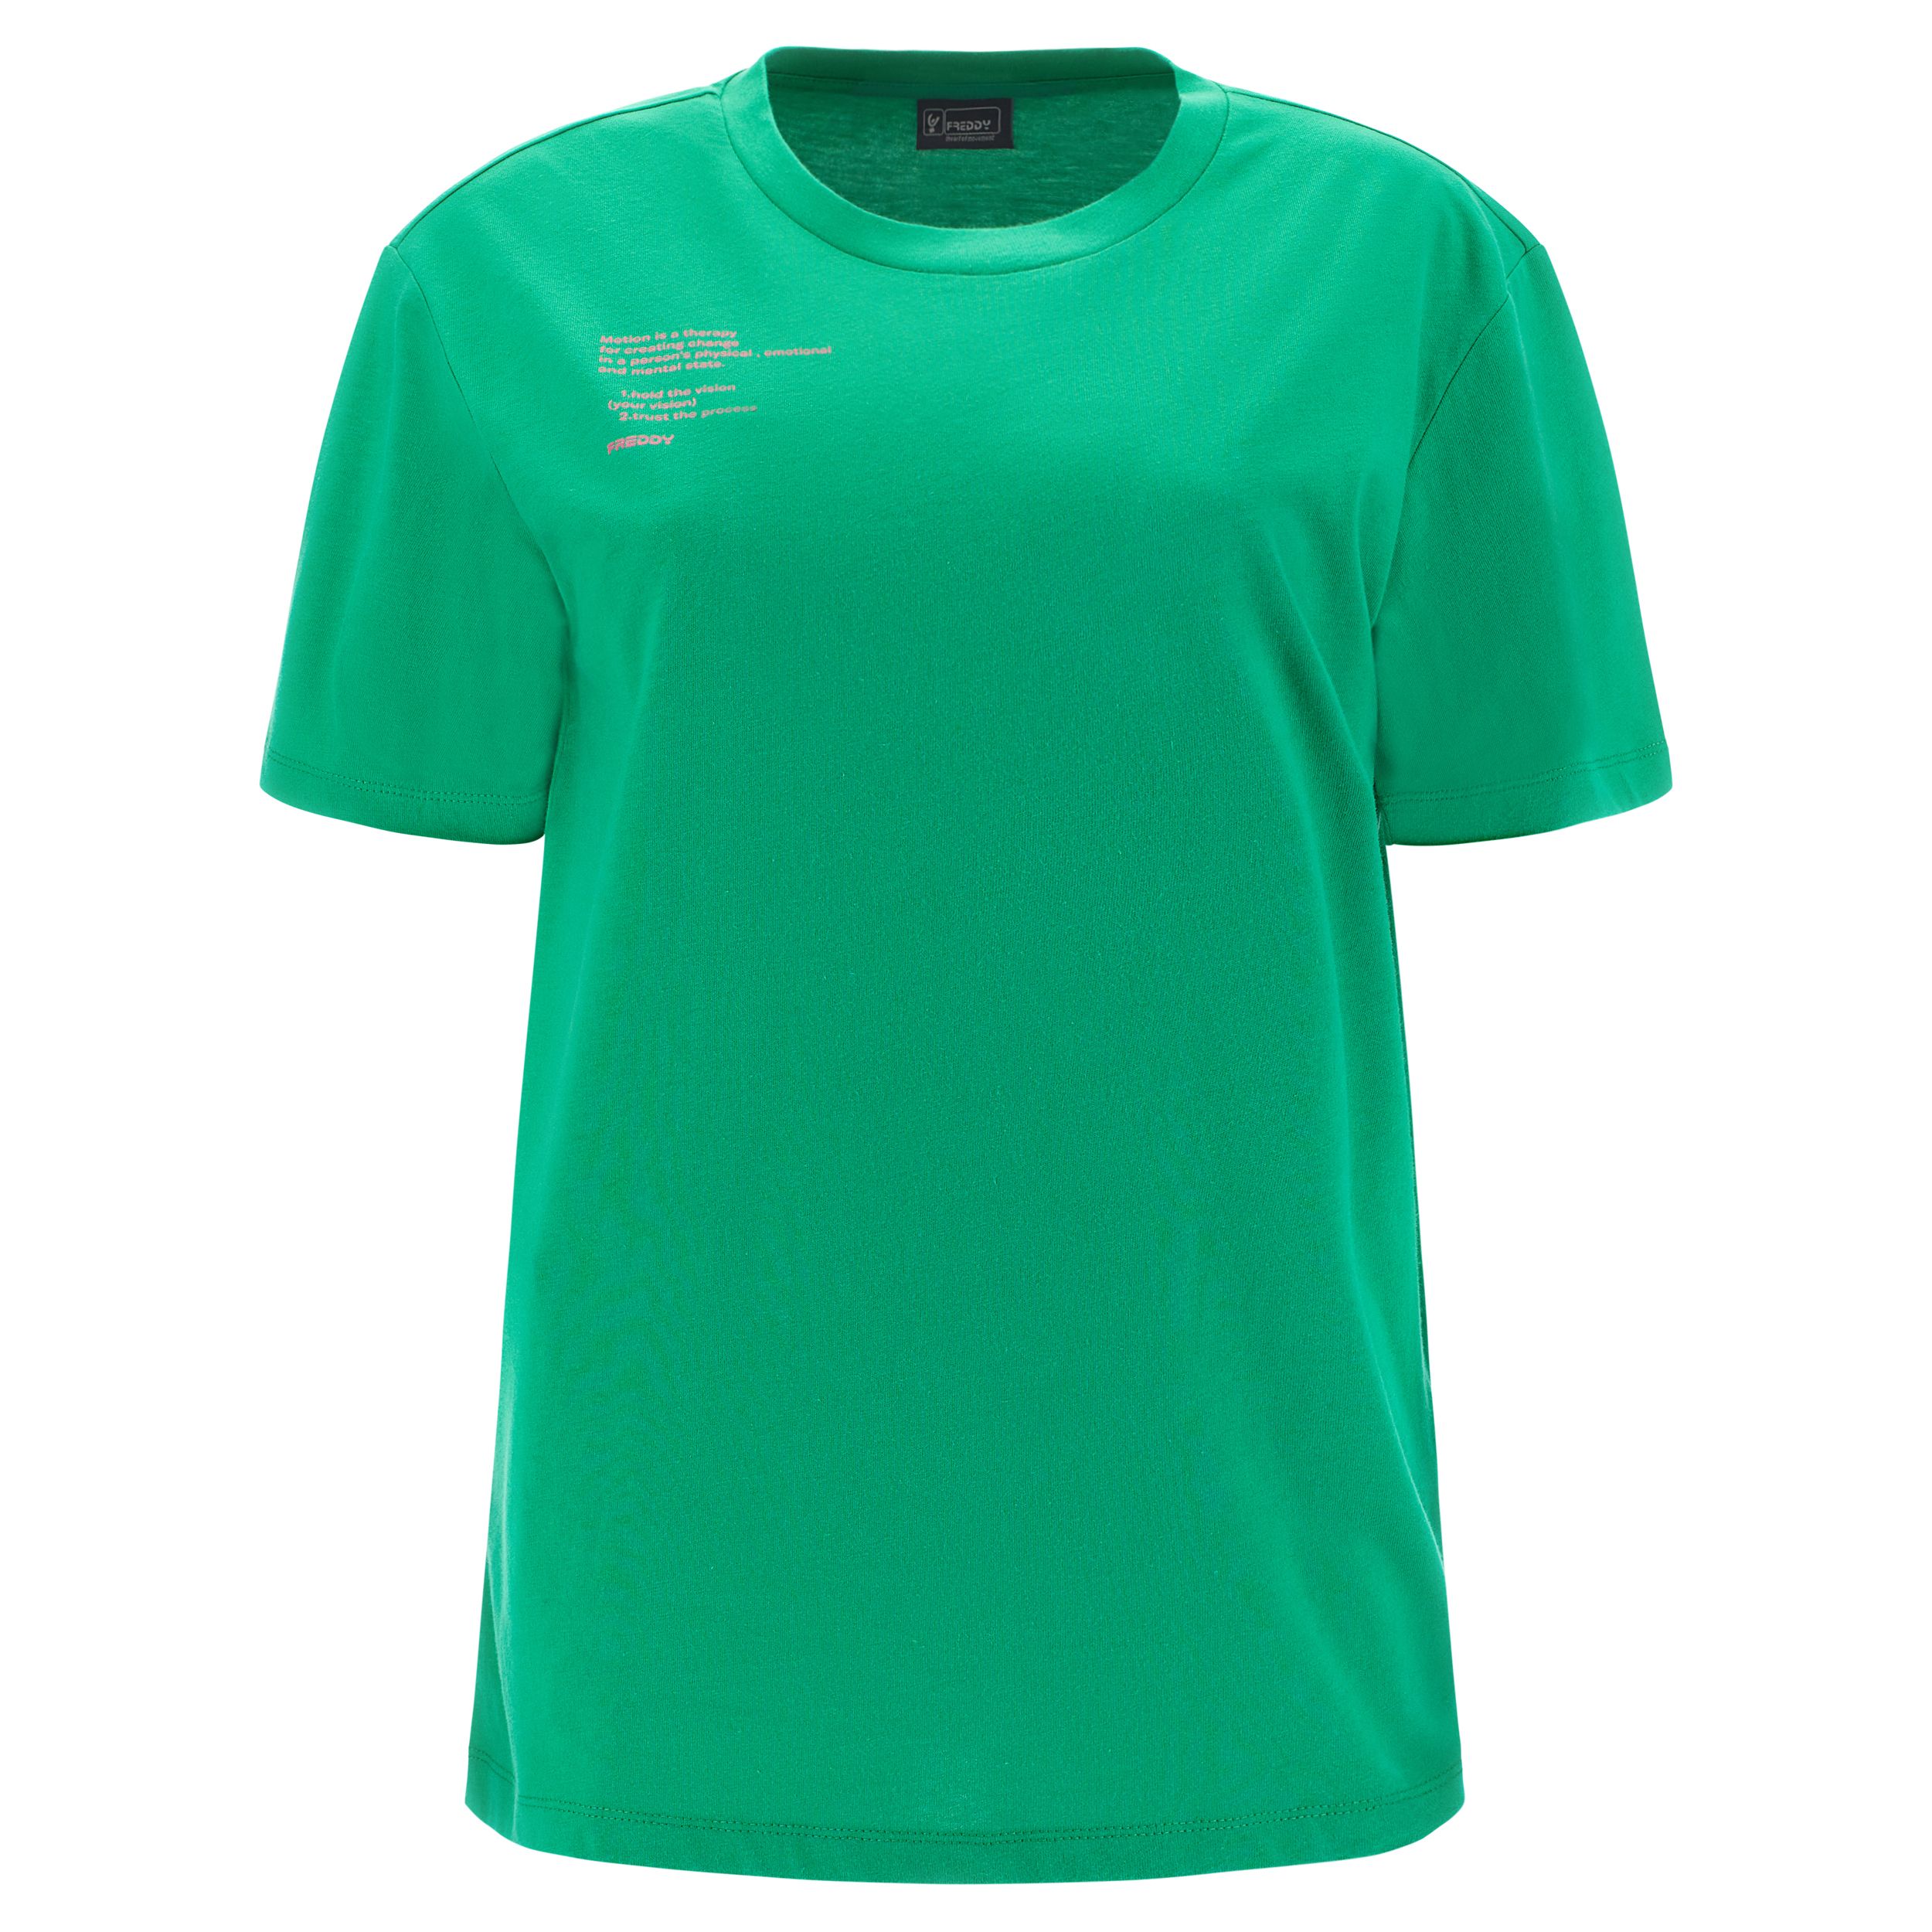 FREDDY Cotton t-shirt with printed text (S3WGZT4-V87) Bright Green